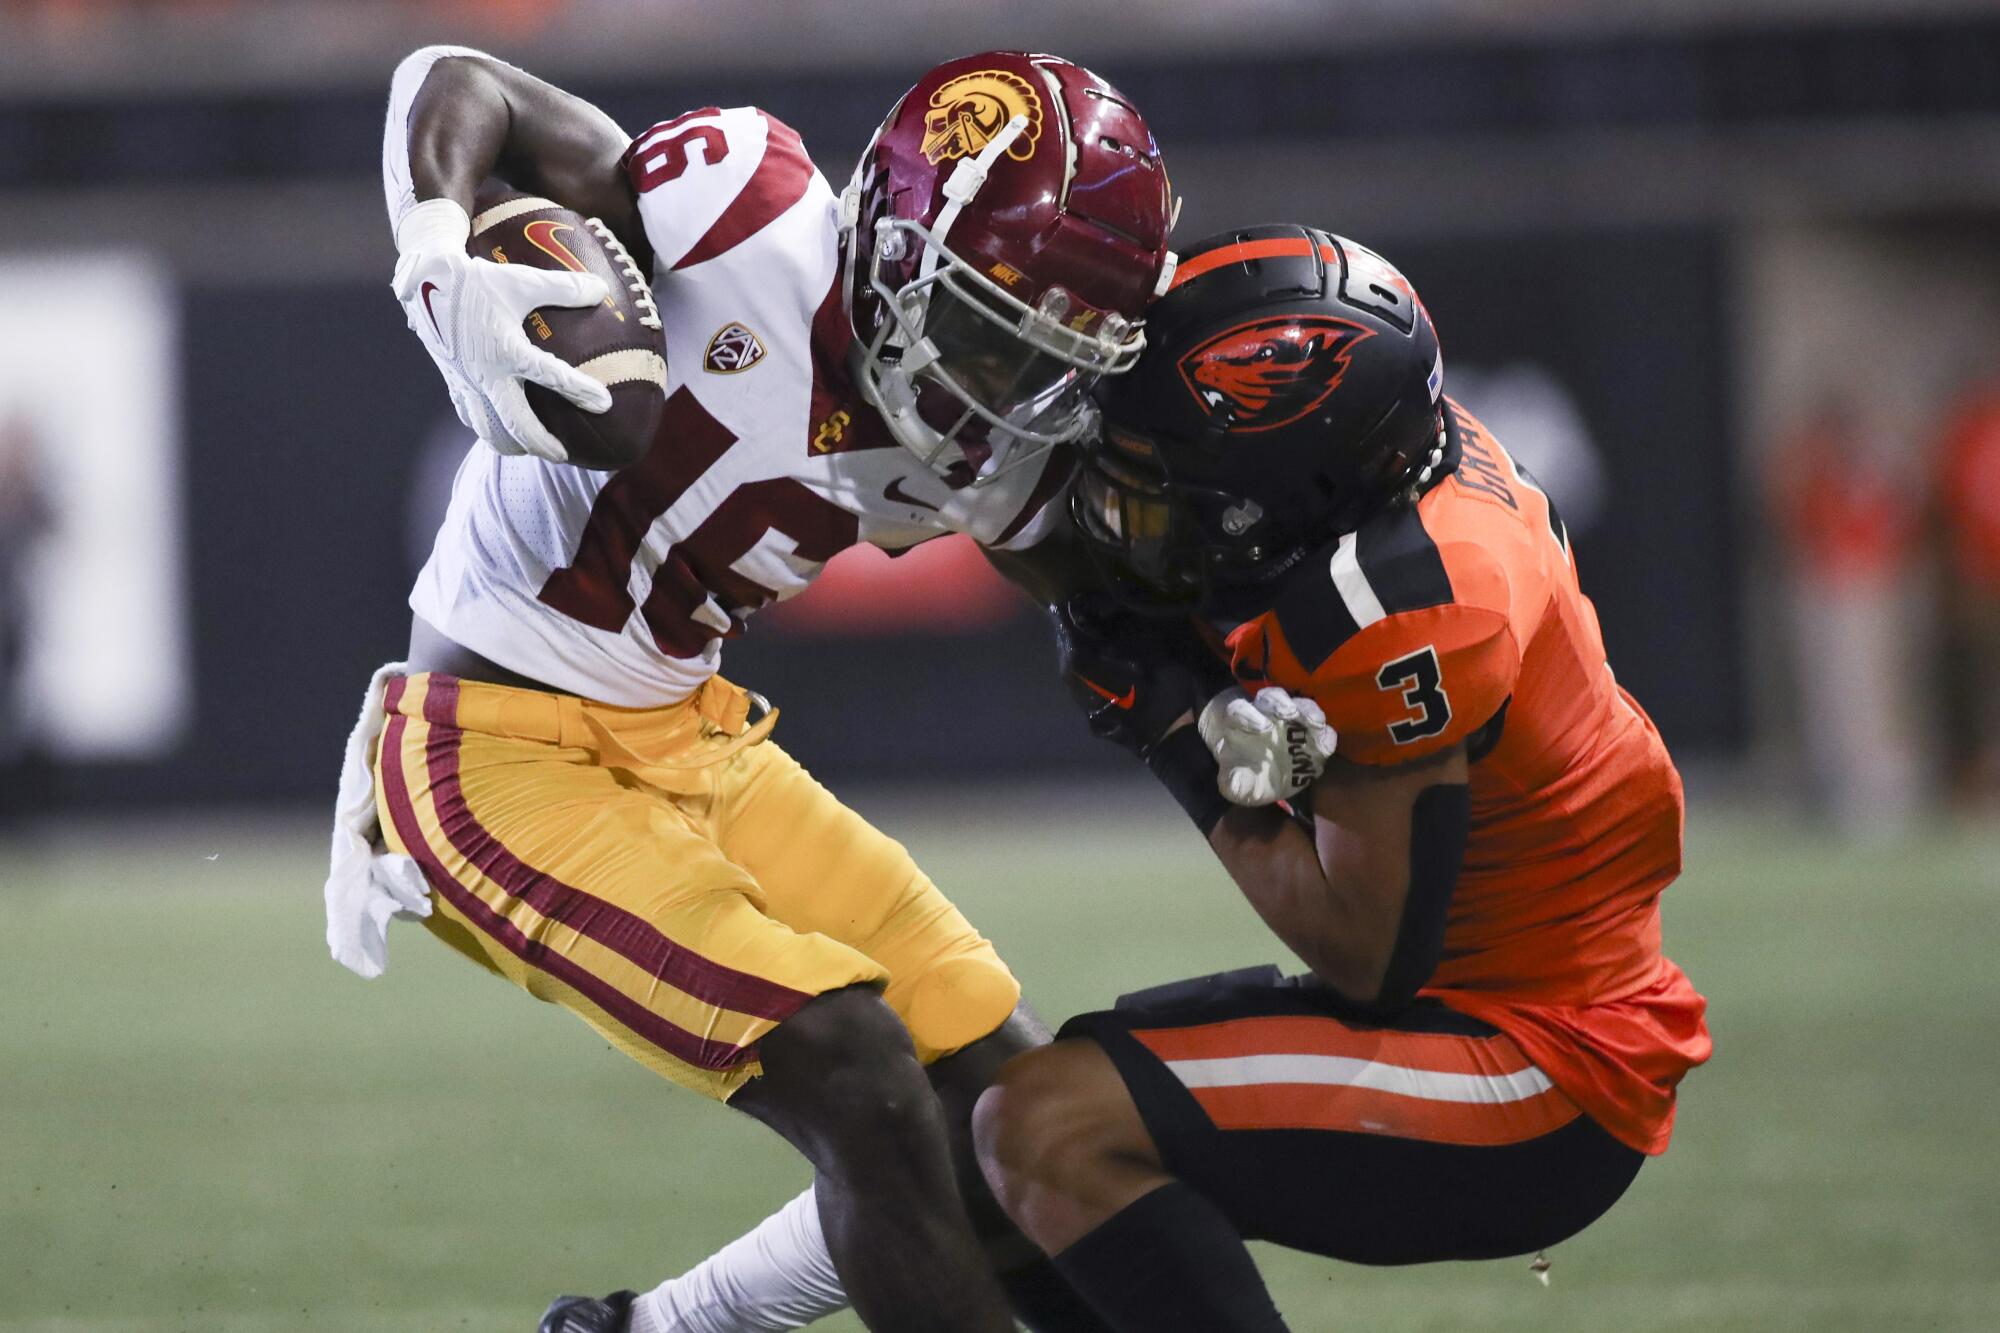 USC wide receiver Tahj Washington is brought down by Oregon State defensive back Jaydon Grant.